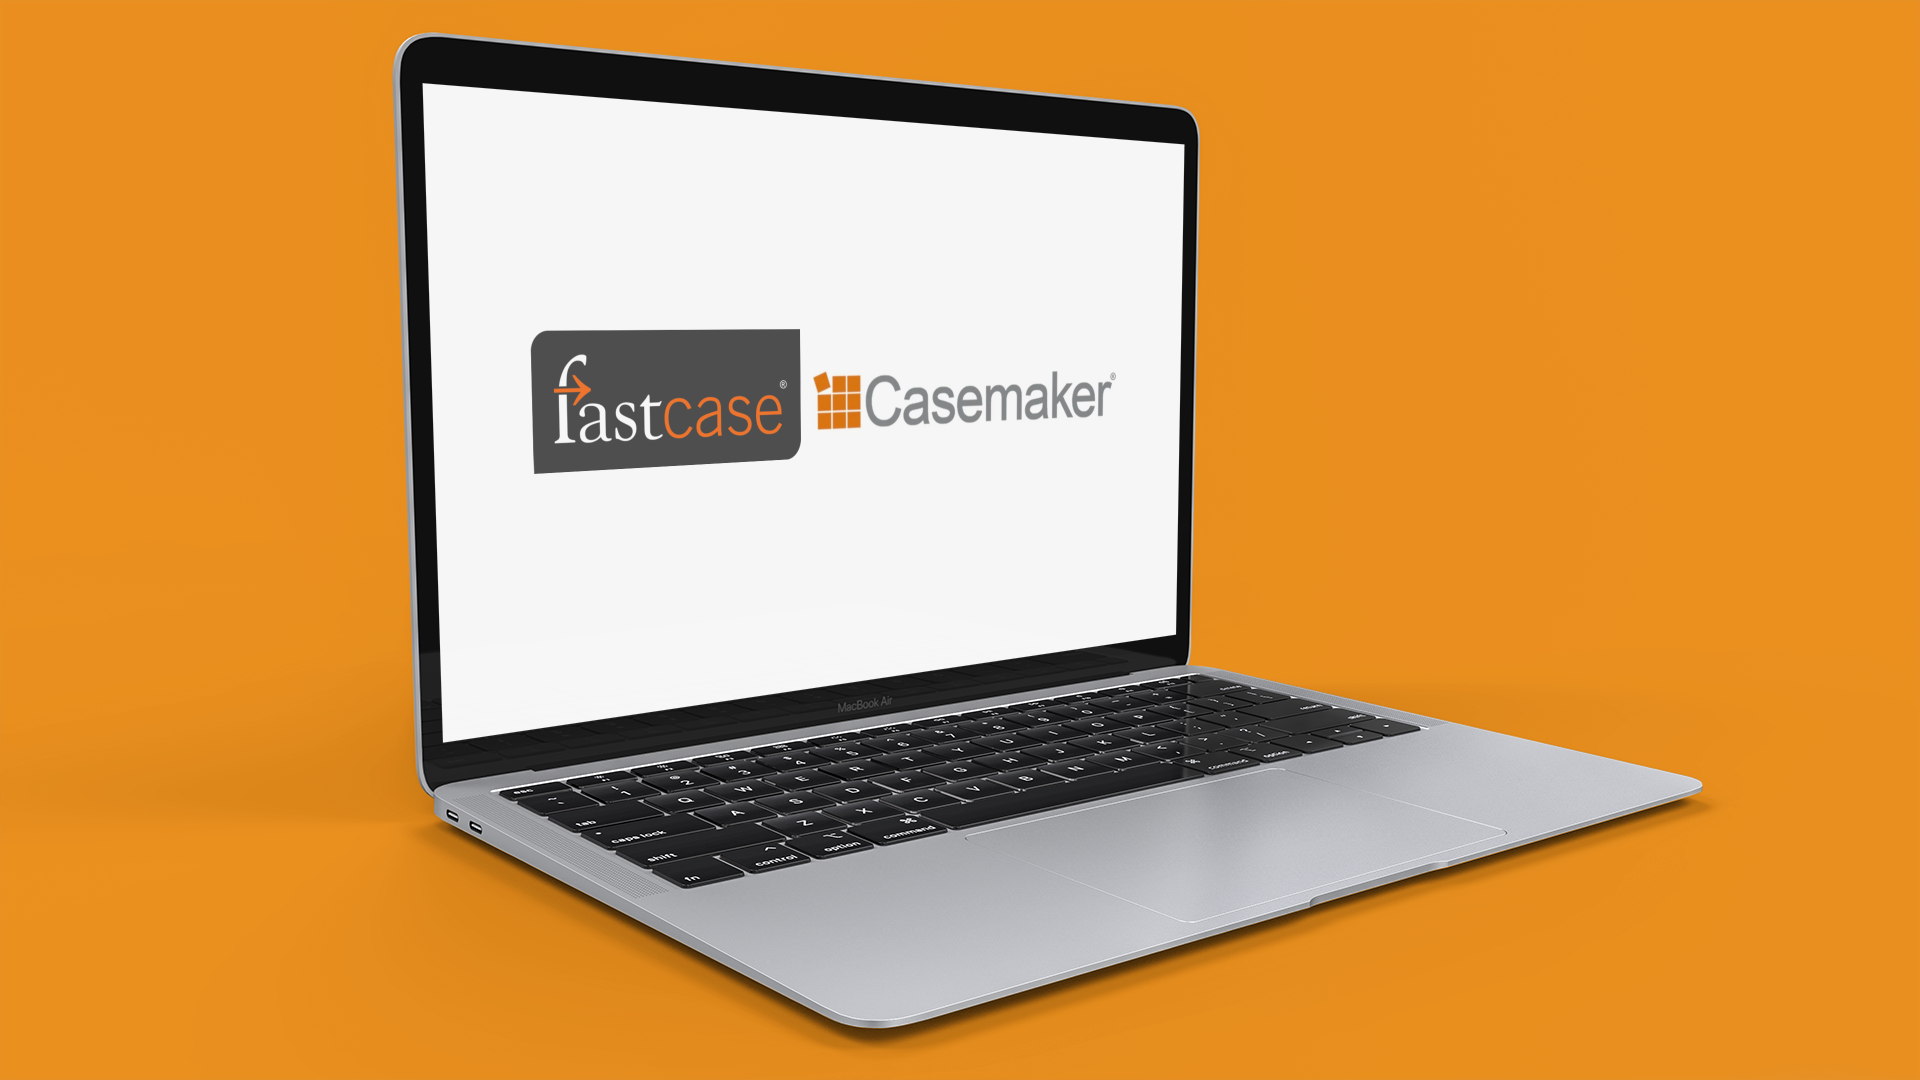 Longtime Competitors Fastcase and Casemaker Merge, Reshaping the Legal Research Landscape